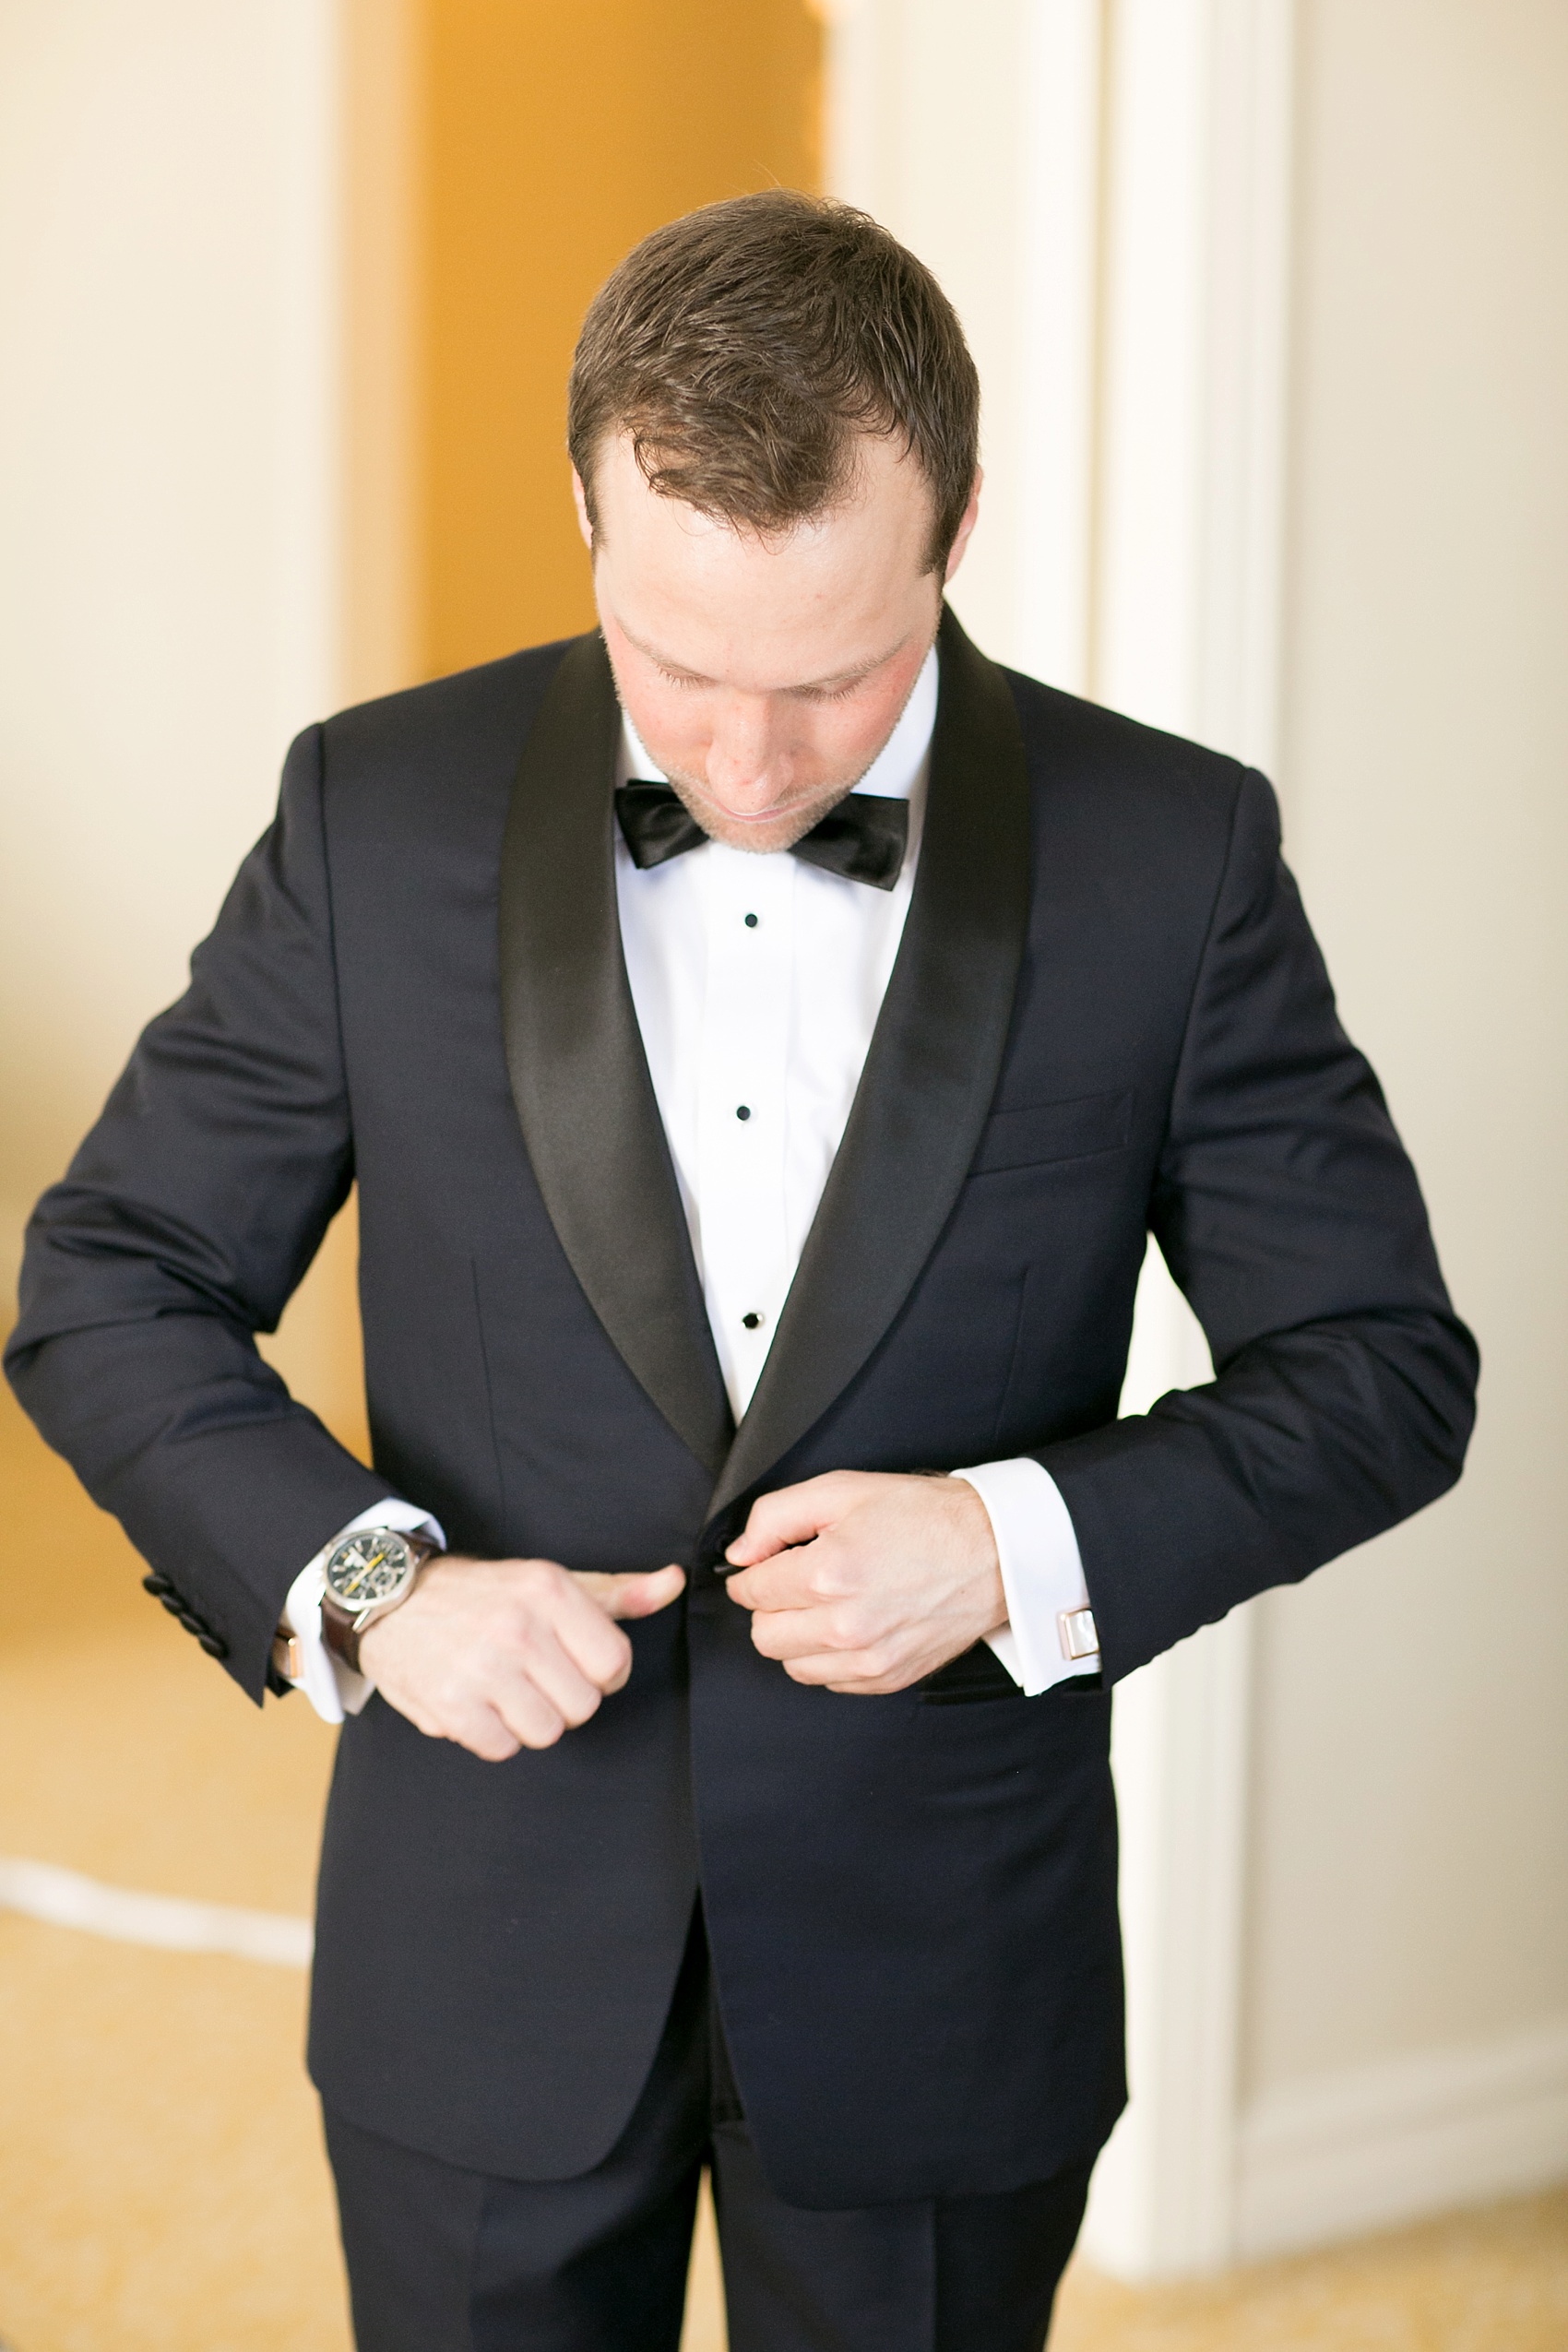 Washington, DC wedding photos by Mikkel Paige. The groom in a custom navy and black tuxedo for a Presidents Weekend wedding at The Ritz Carlton, Pentagon City.